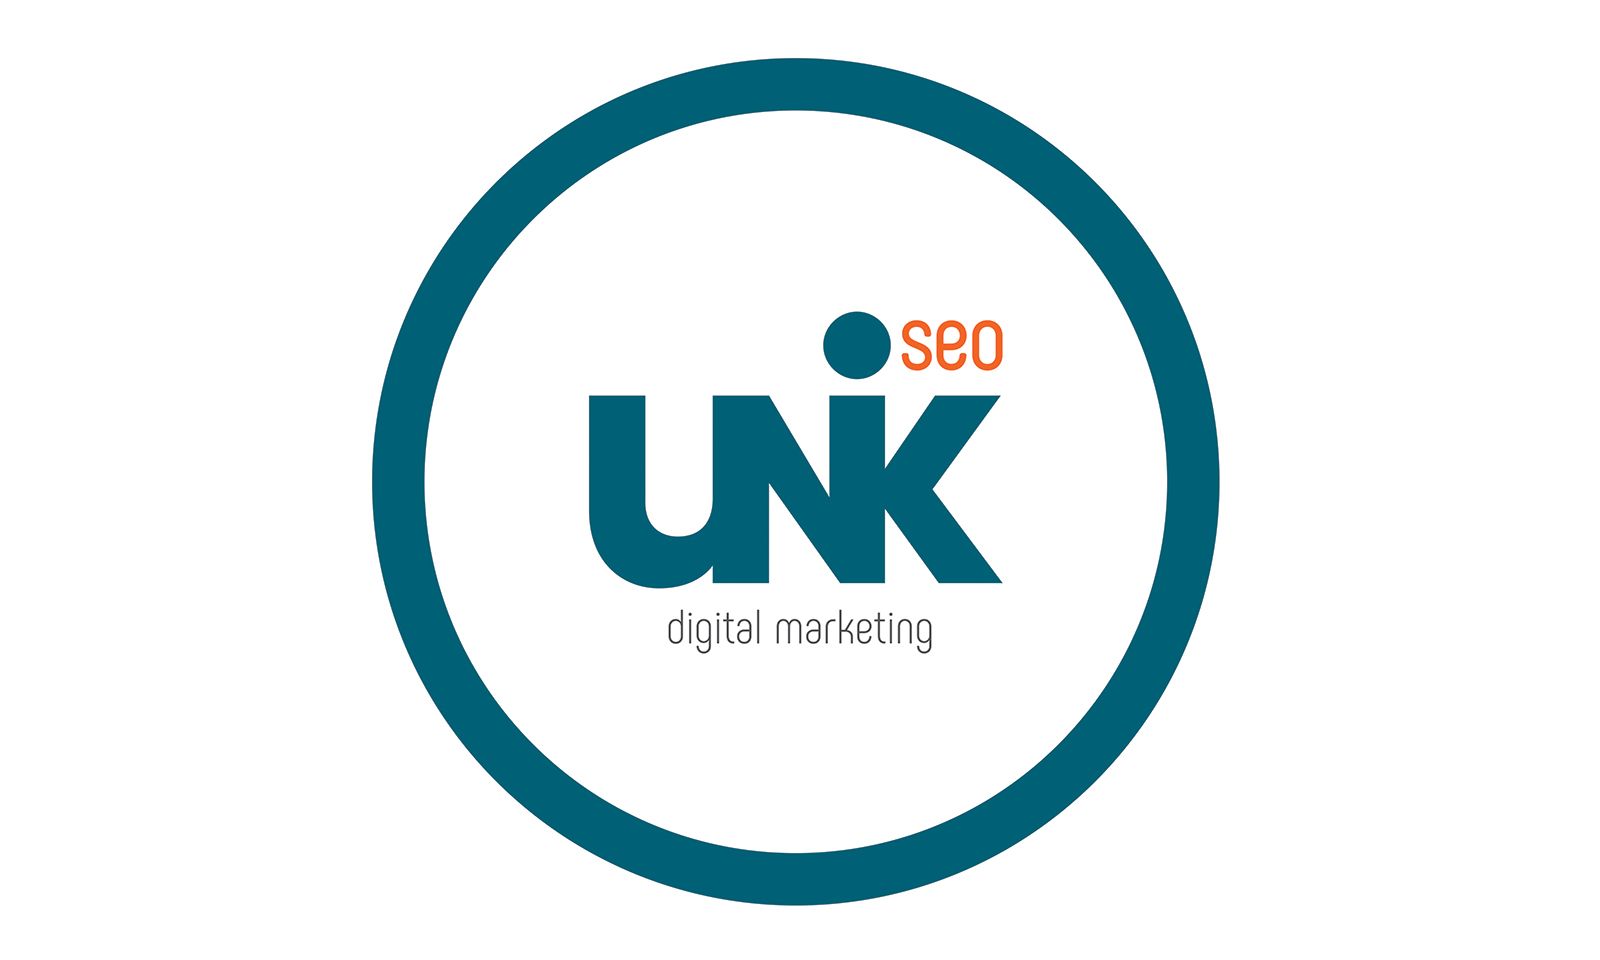 UniK SEO Looking To Expand its International Client Line Up